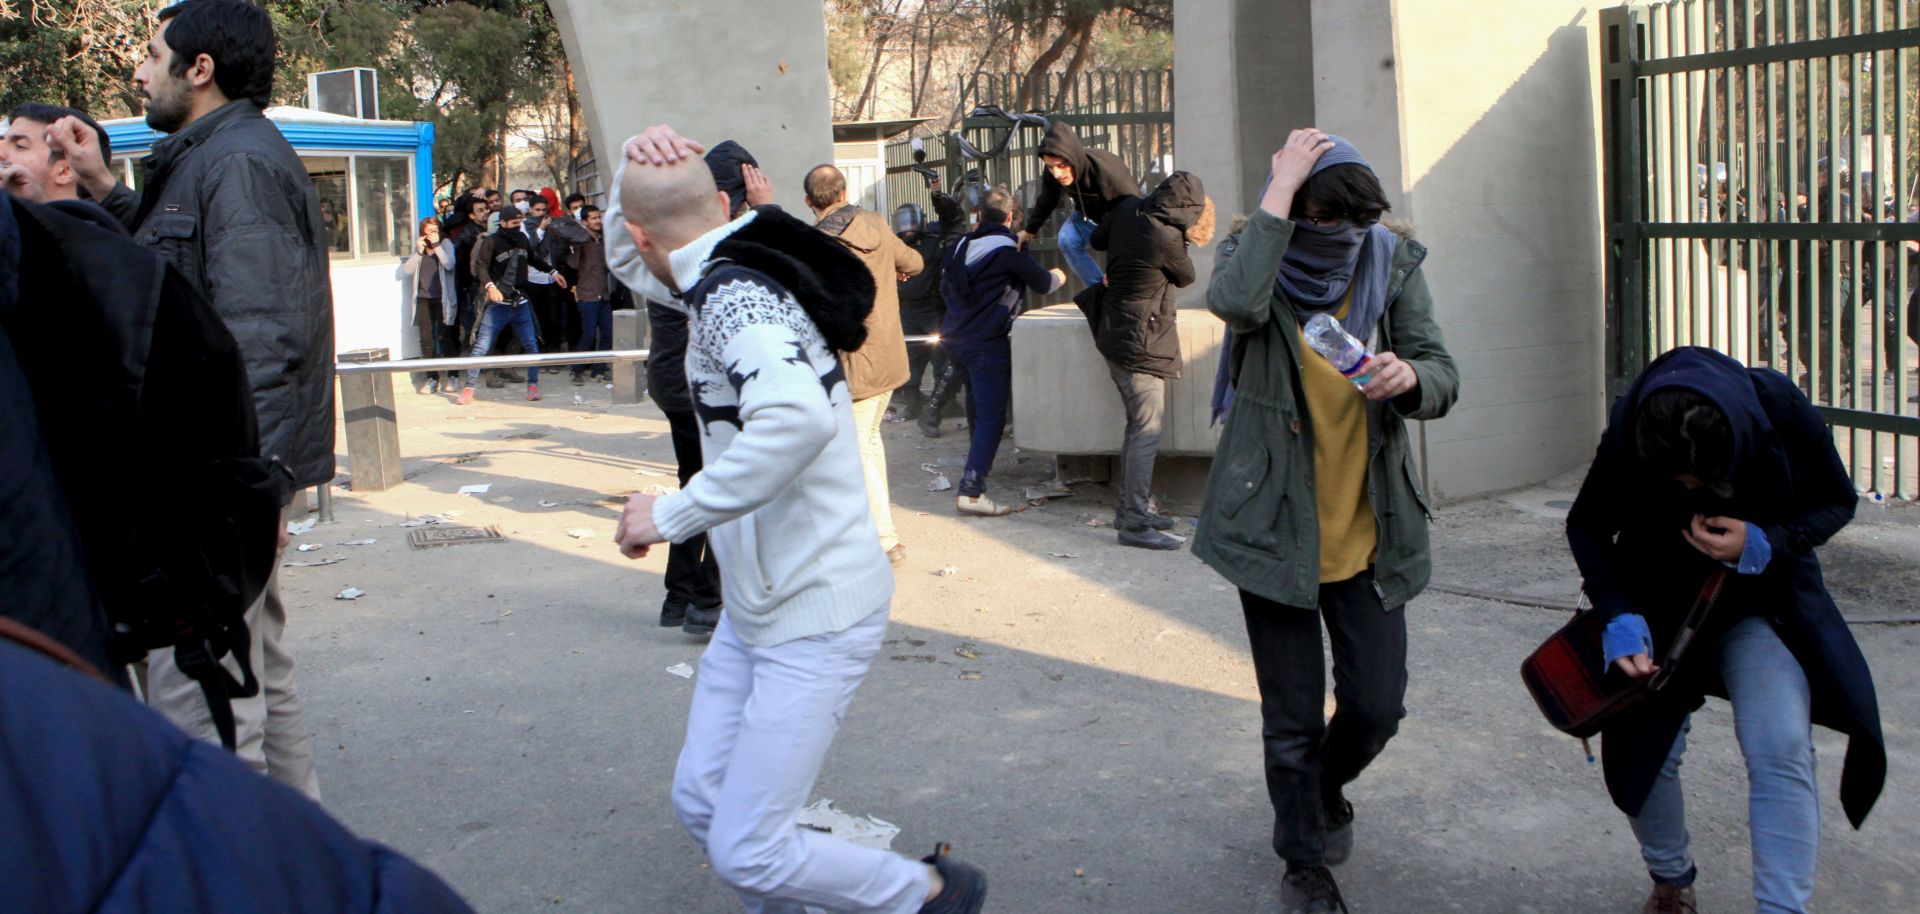 Students at the University of Tehran run for cover as tear gas is lobbed at demonstrators on Dec. 30, 2017.